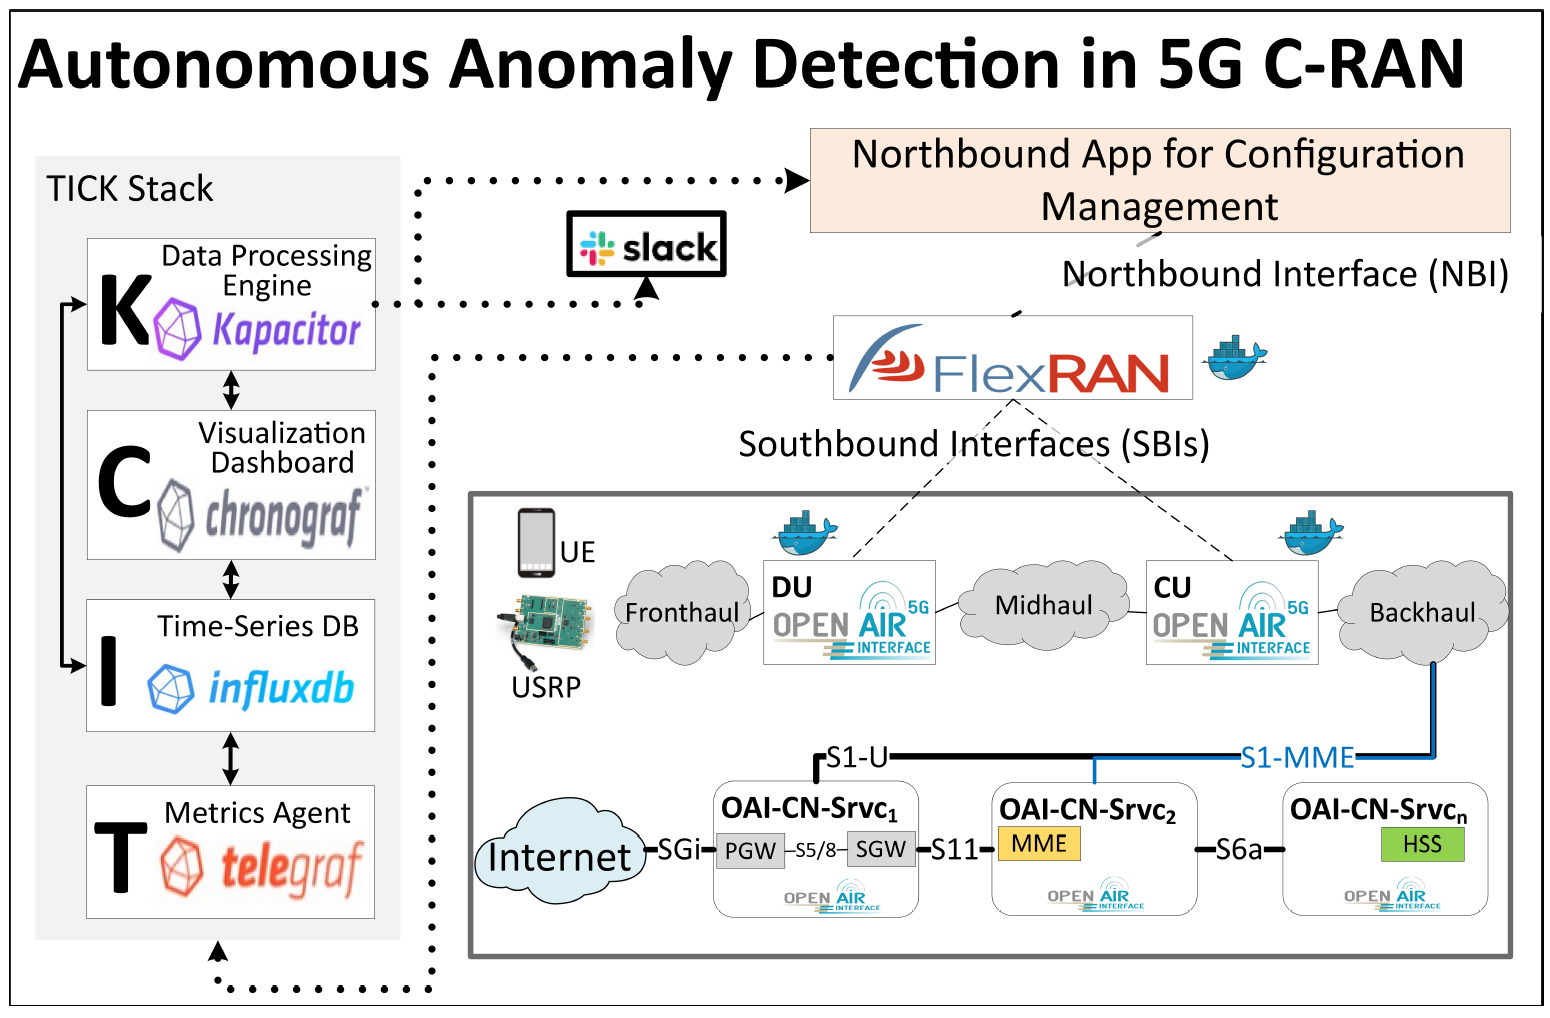 Architecture of the orchestration Platform for 5G